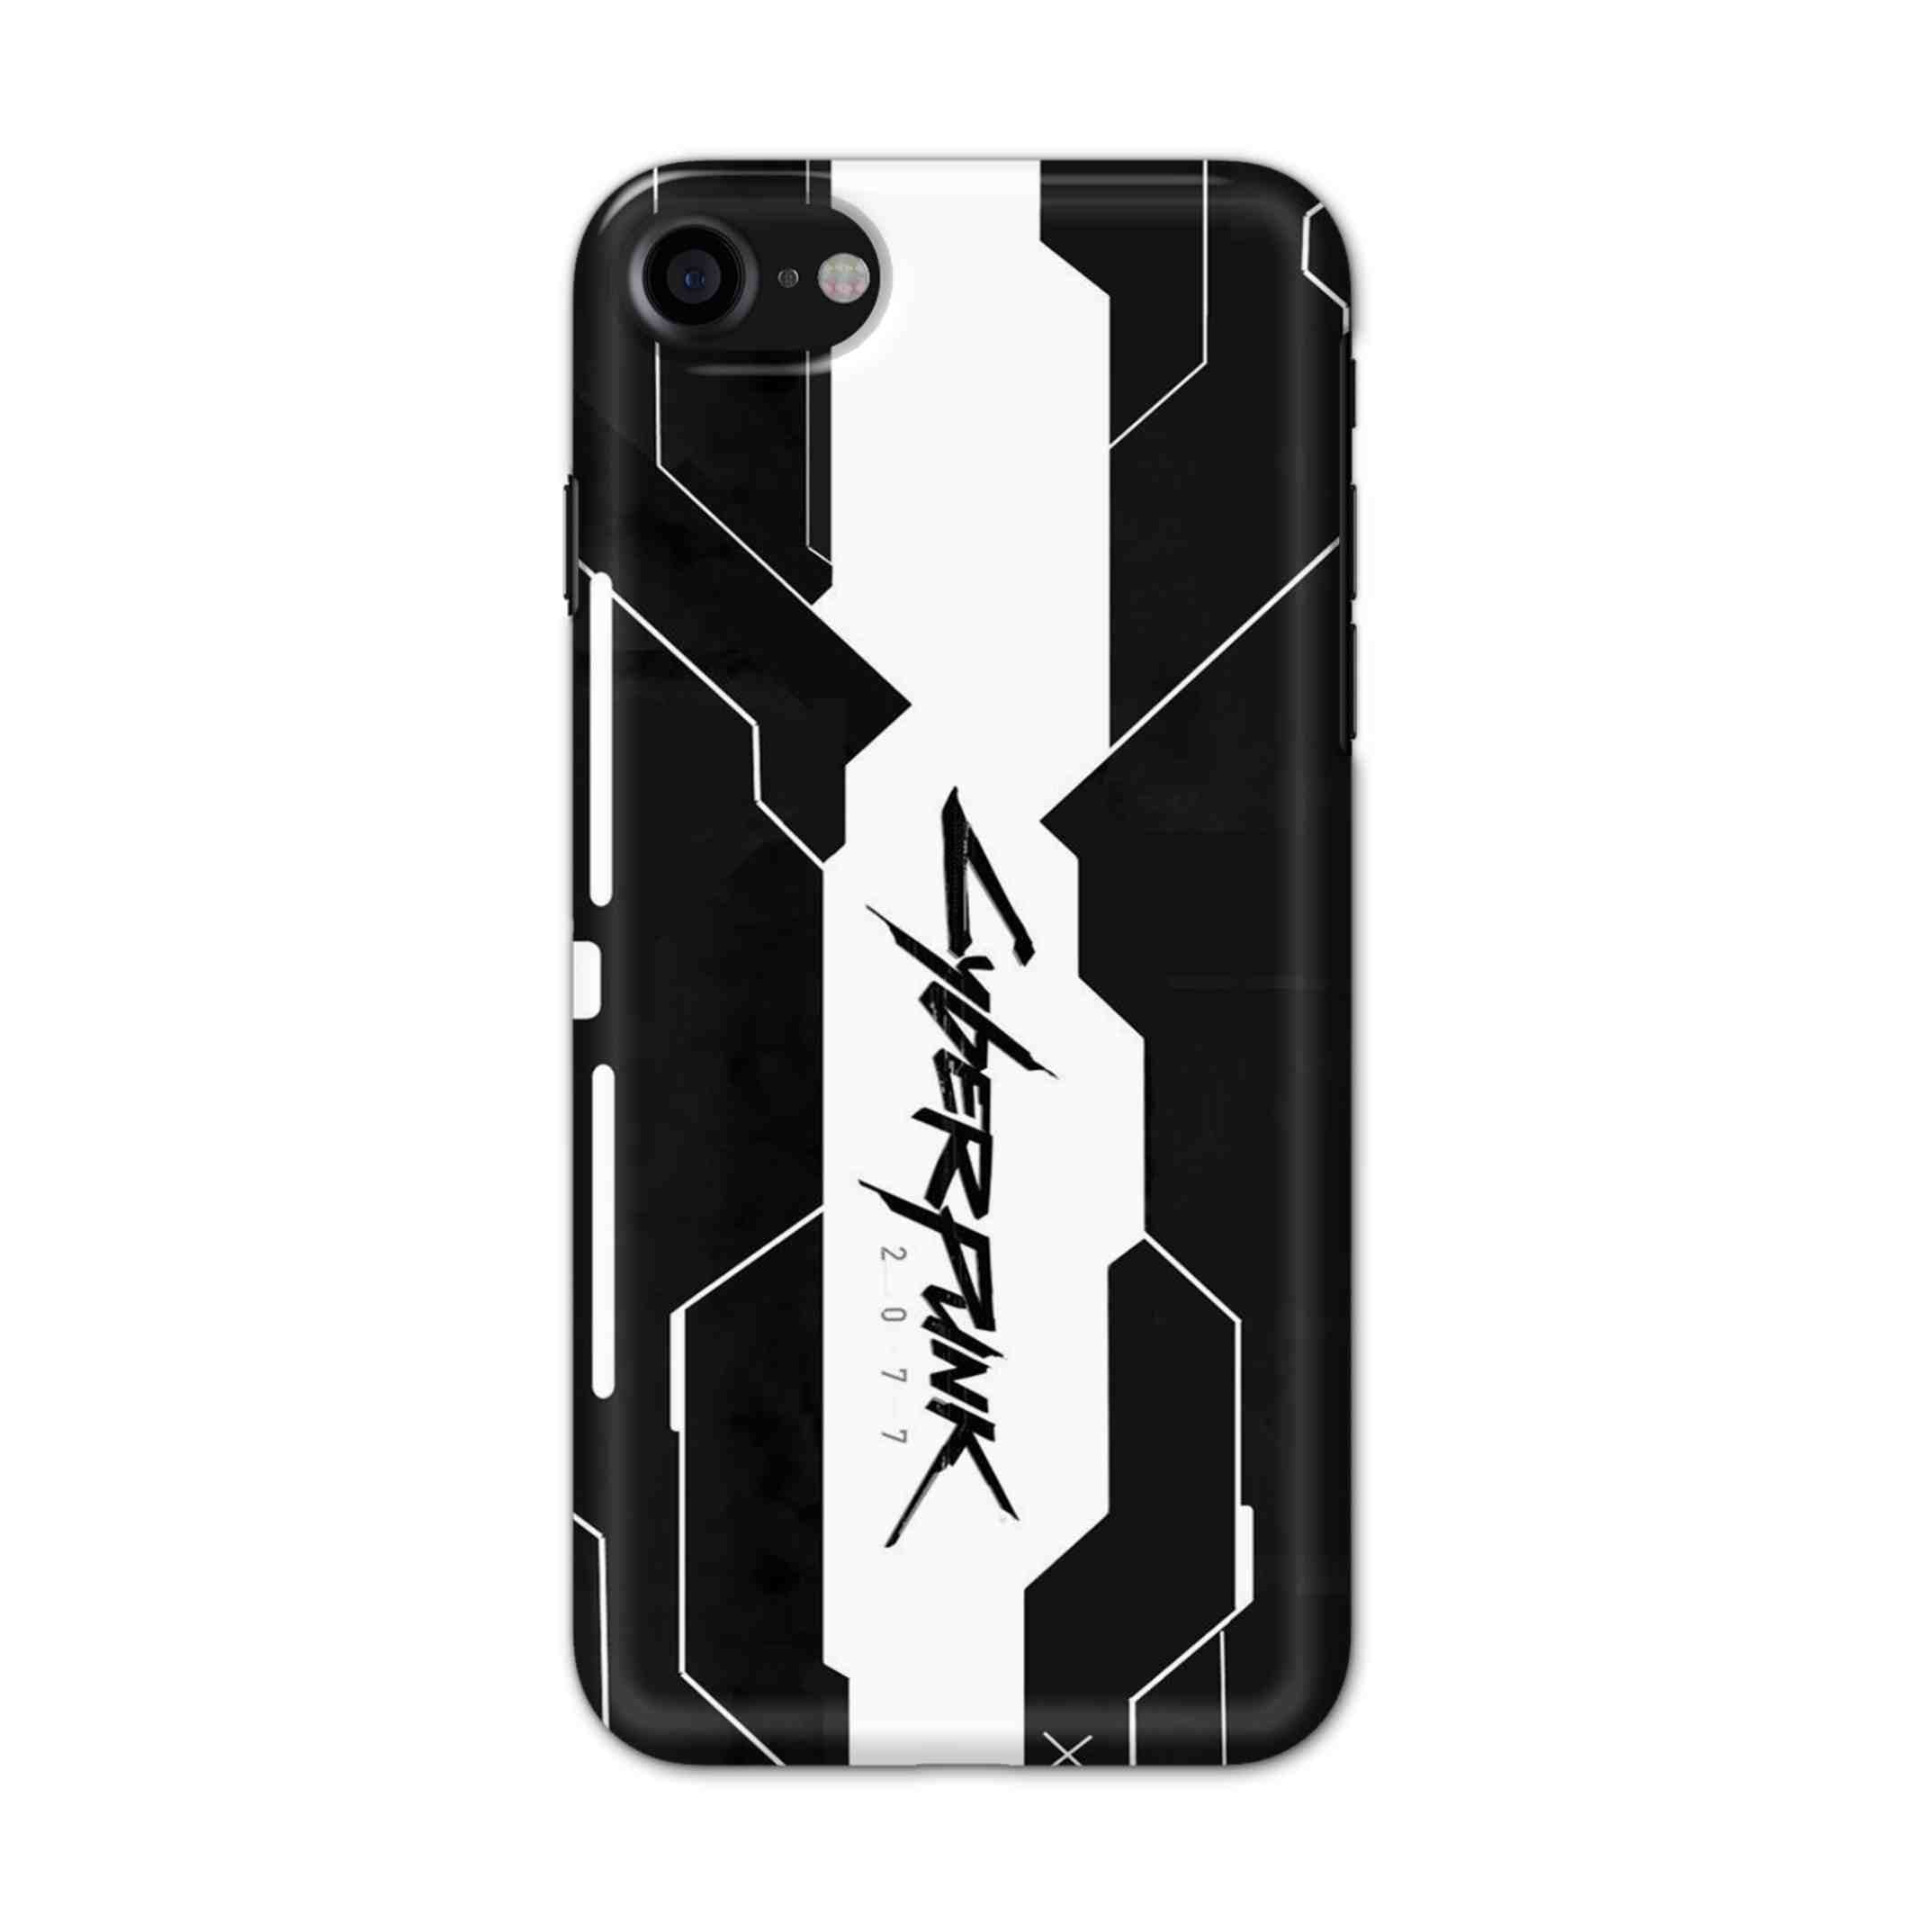 Buy Cyberpunk 2077 Art Hard Back Mobile Phone Case/Cover For iPhone 7 / 8 Online